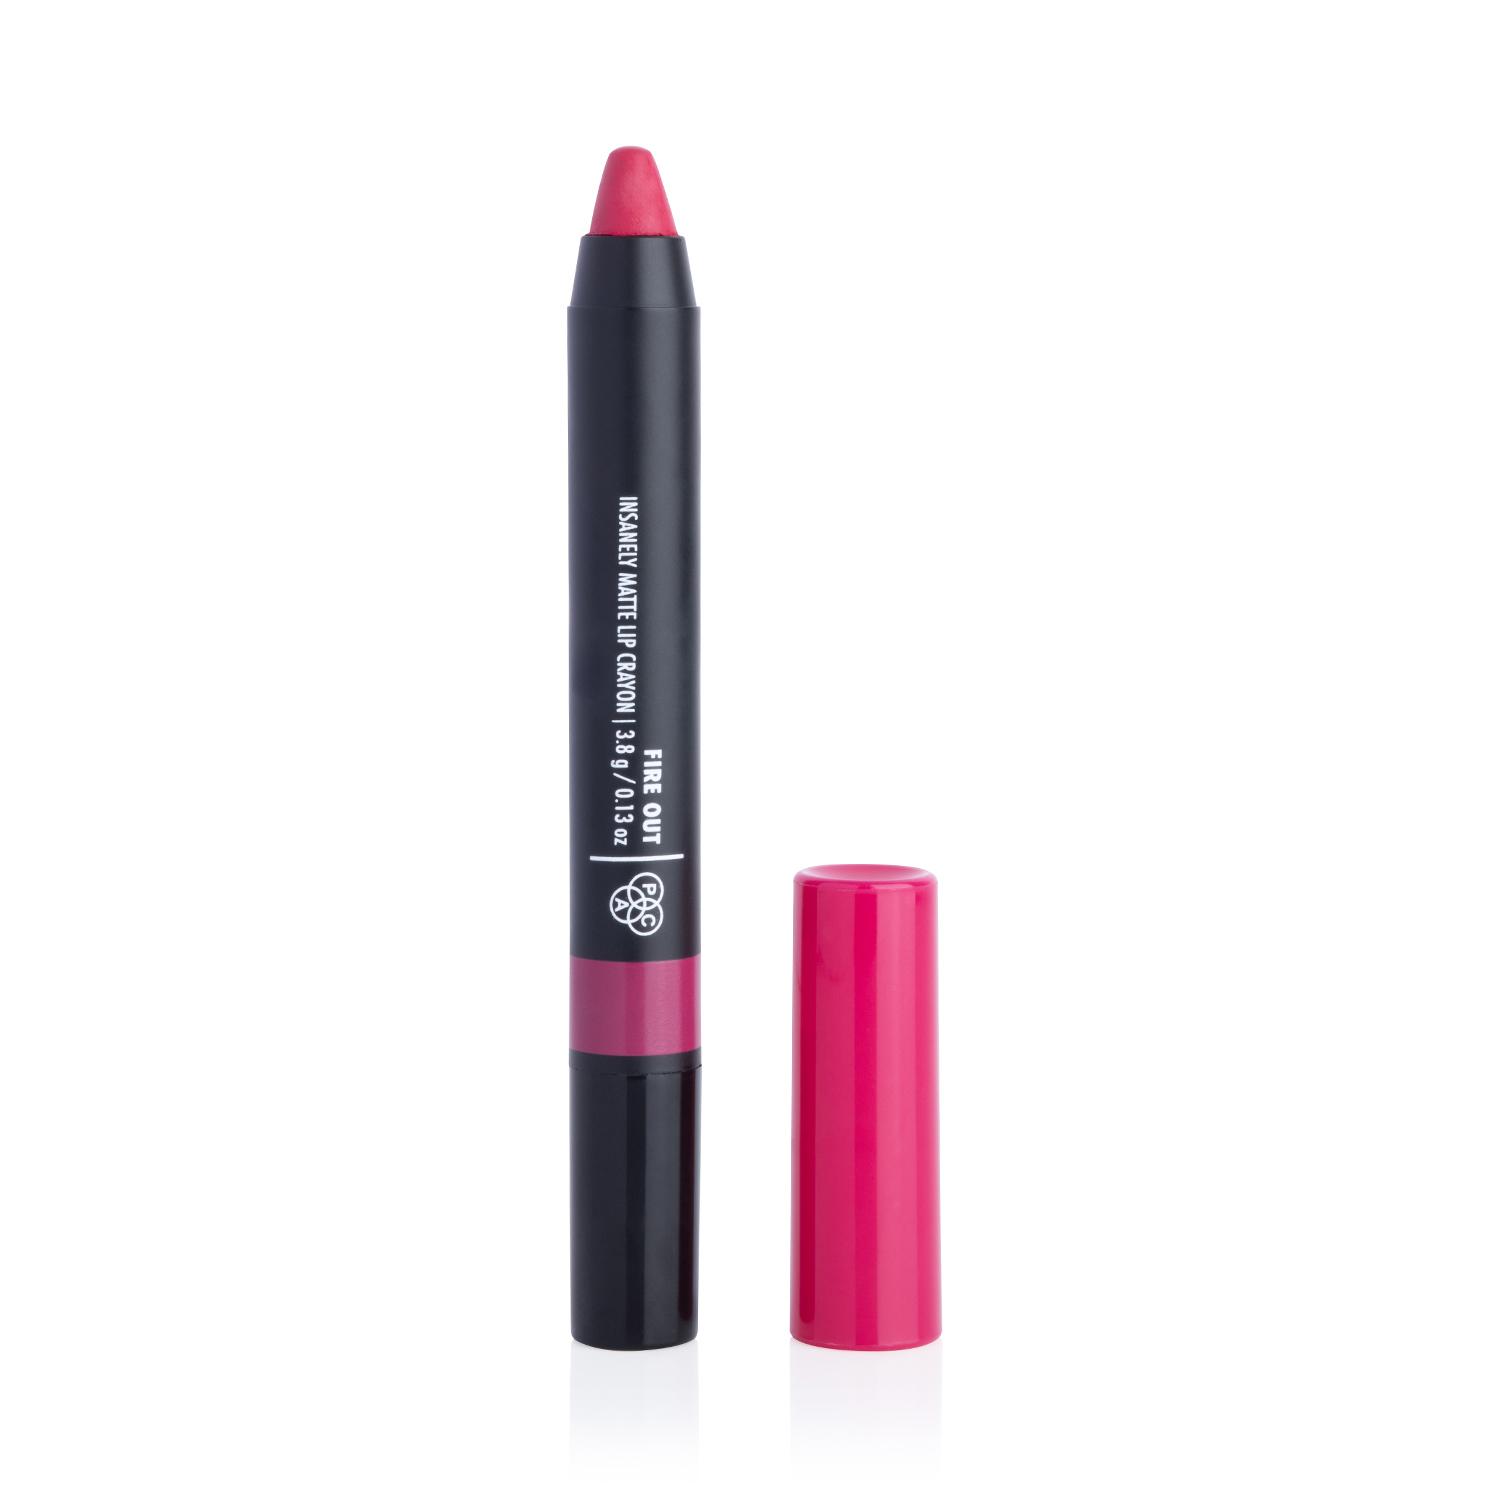 PAC | PAC Insanely Matte Lip Crayon - Fire Out (3.8g)